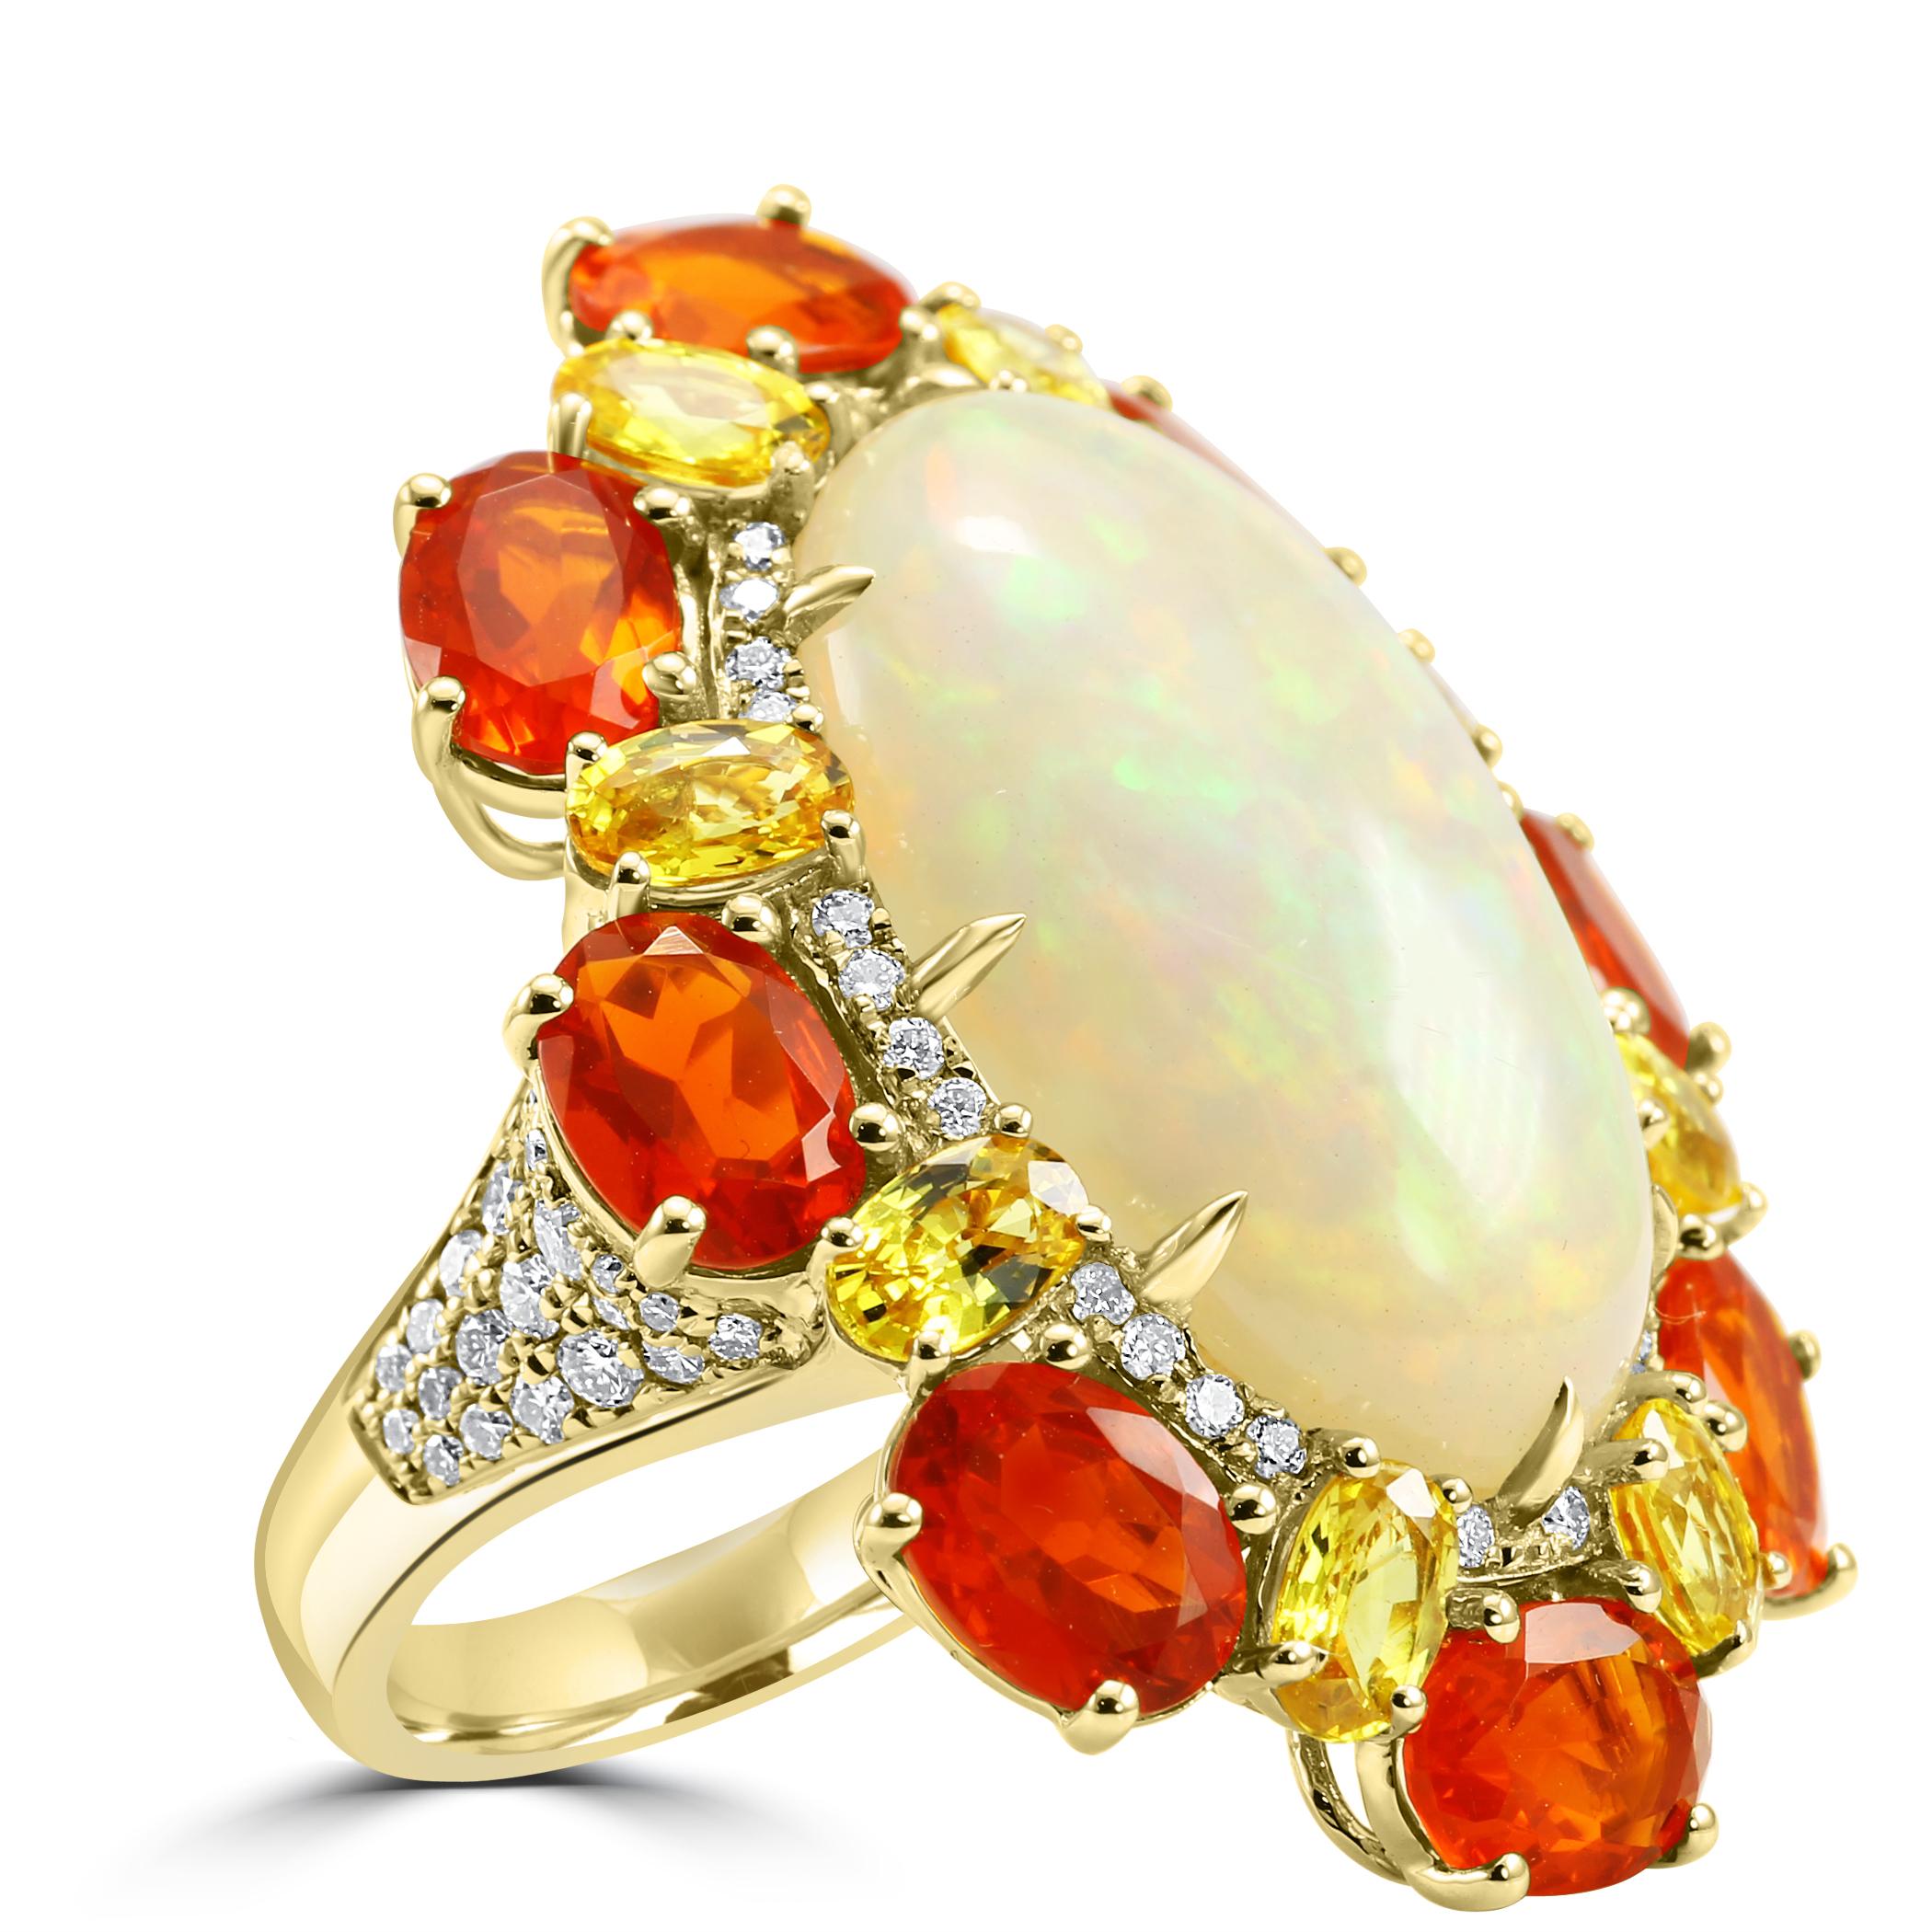 At the heart of this stunning ring lies a splendid Opal, carefully selected for its substantial size and captivating play of colors. With a weight of 9.47 carats, this opal displays a mesmerizing spectrum of hues, showcasing the ethereal dance of